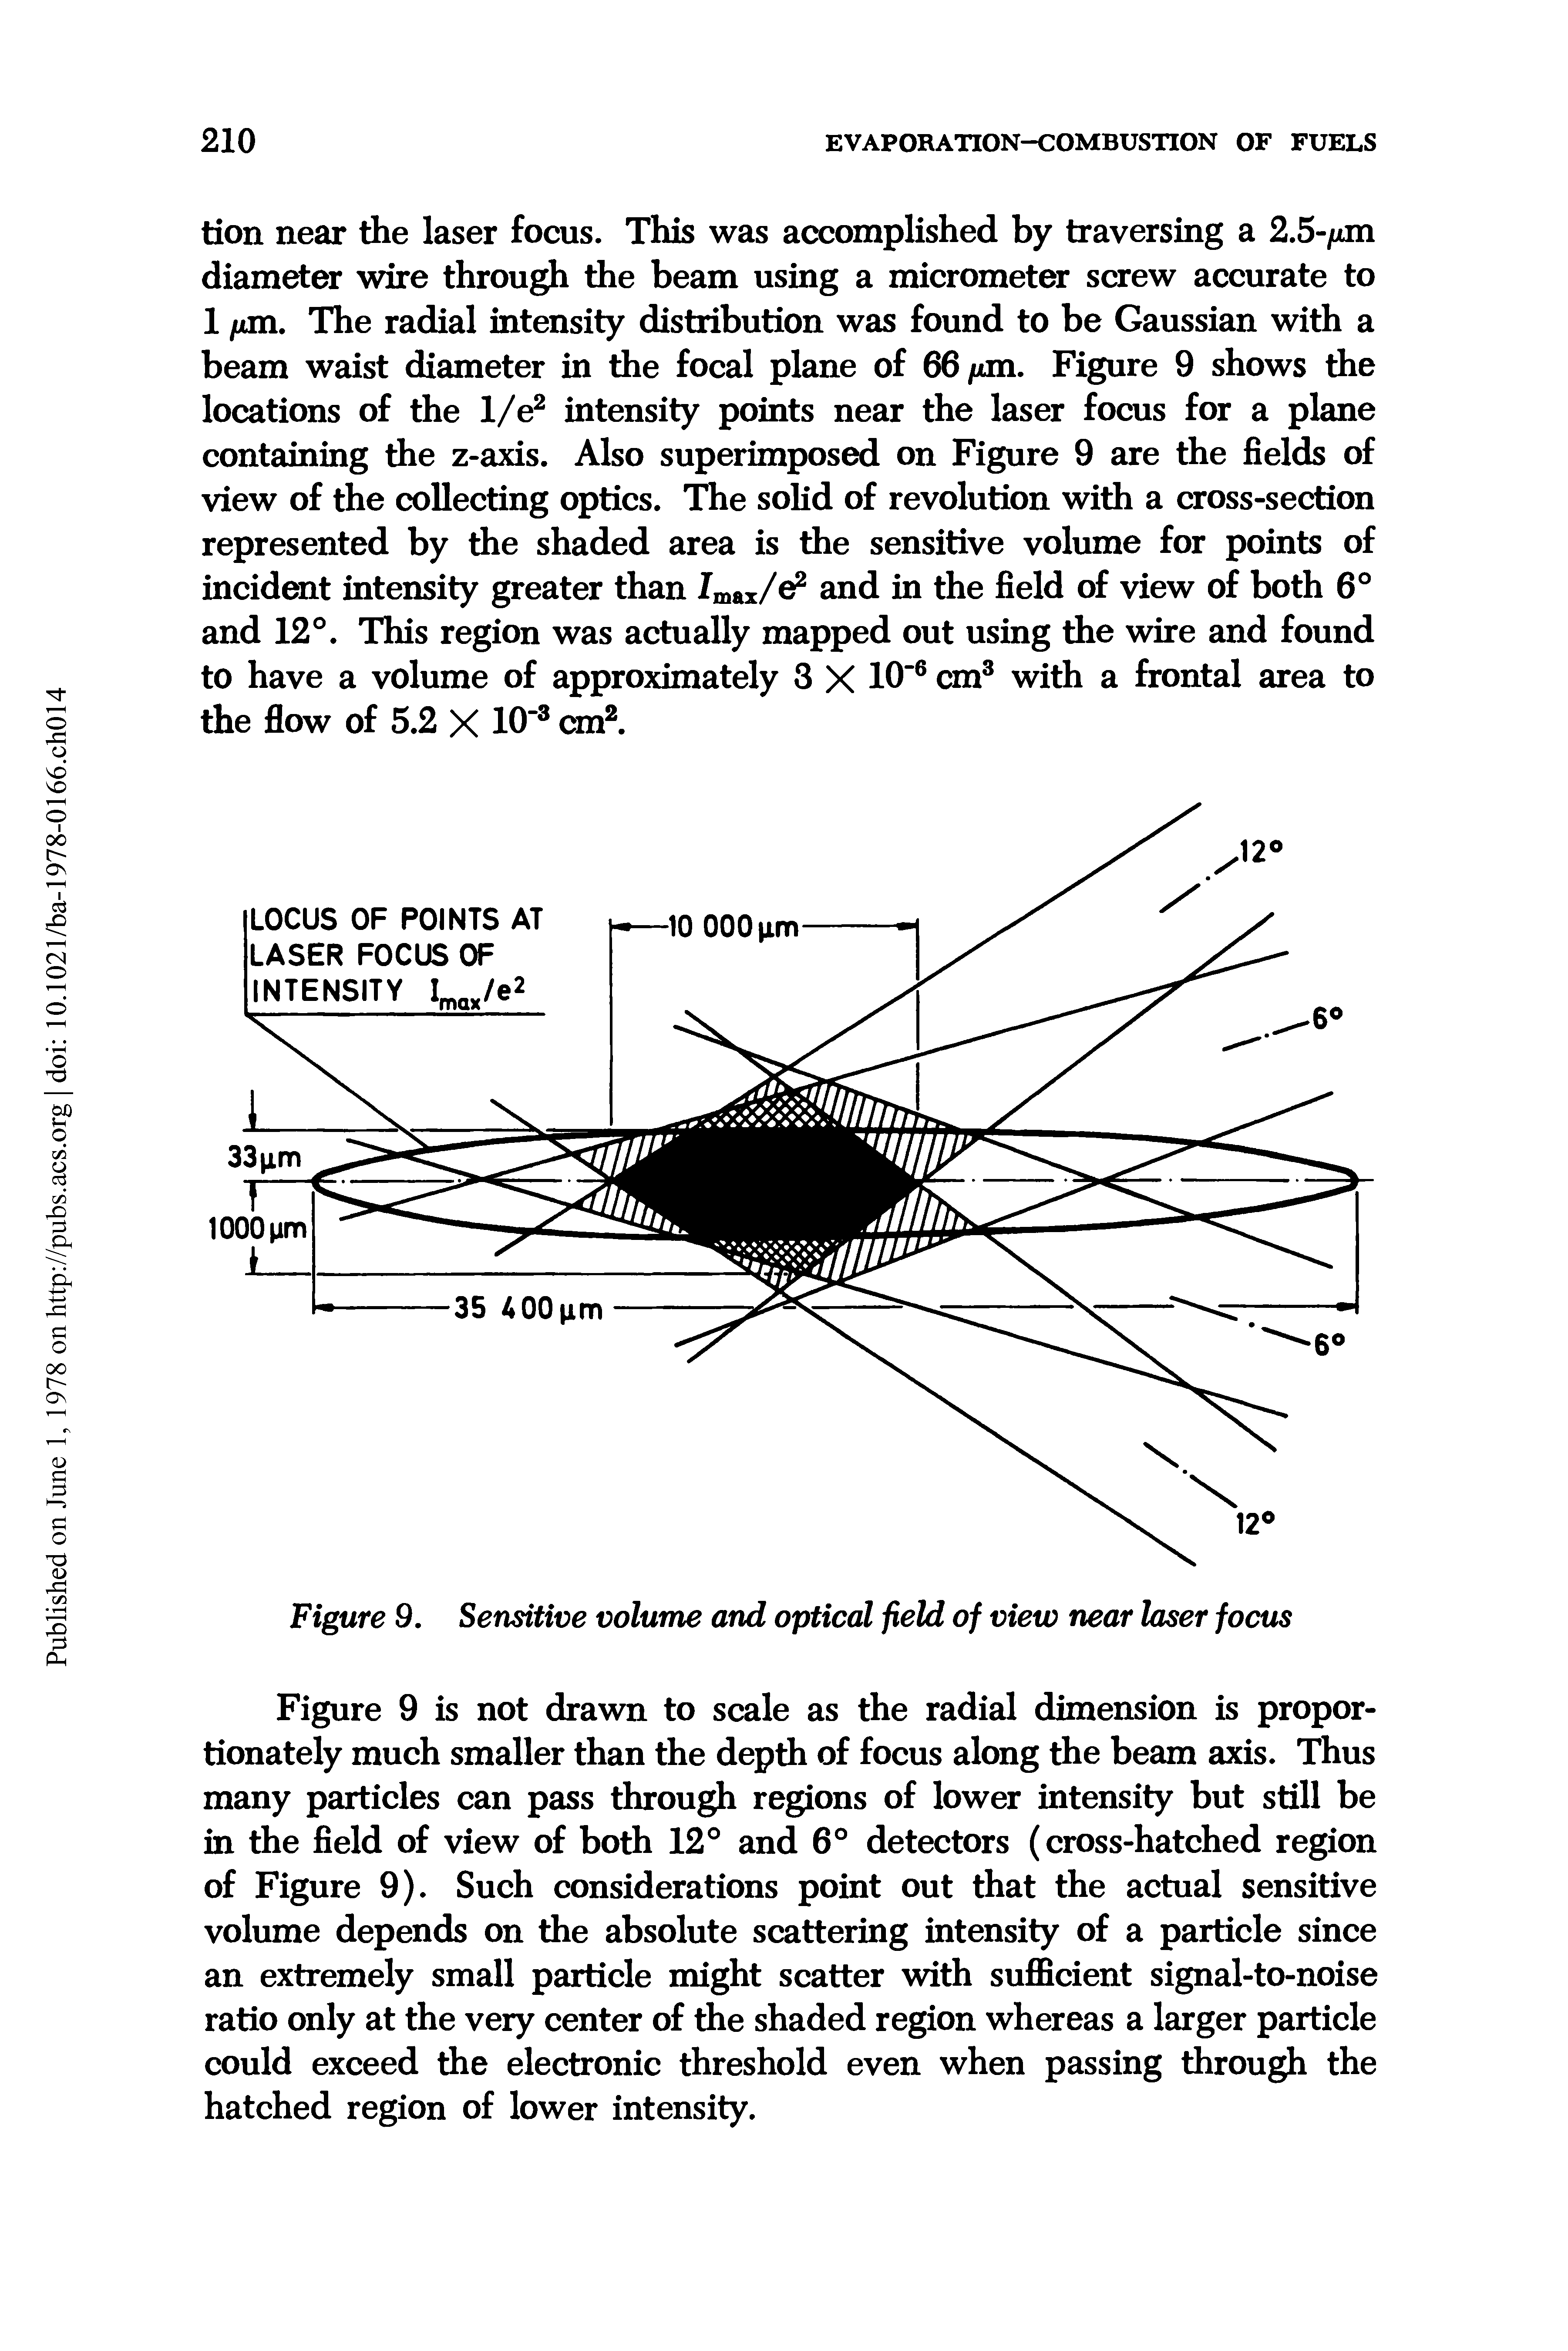 Figure 9. Sensitive volume and optical field of view near laser focus...